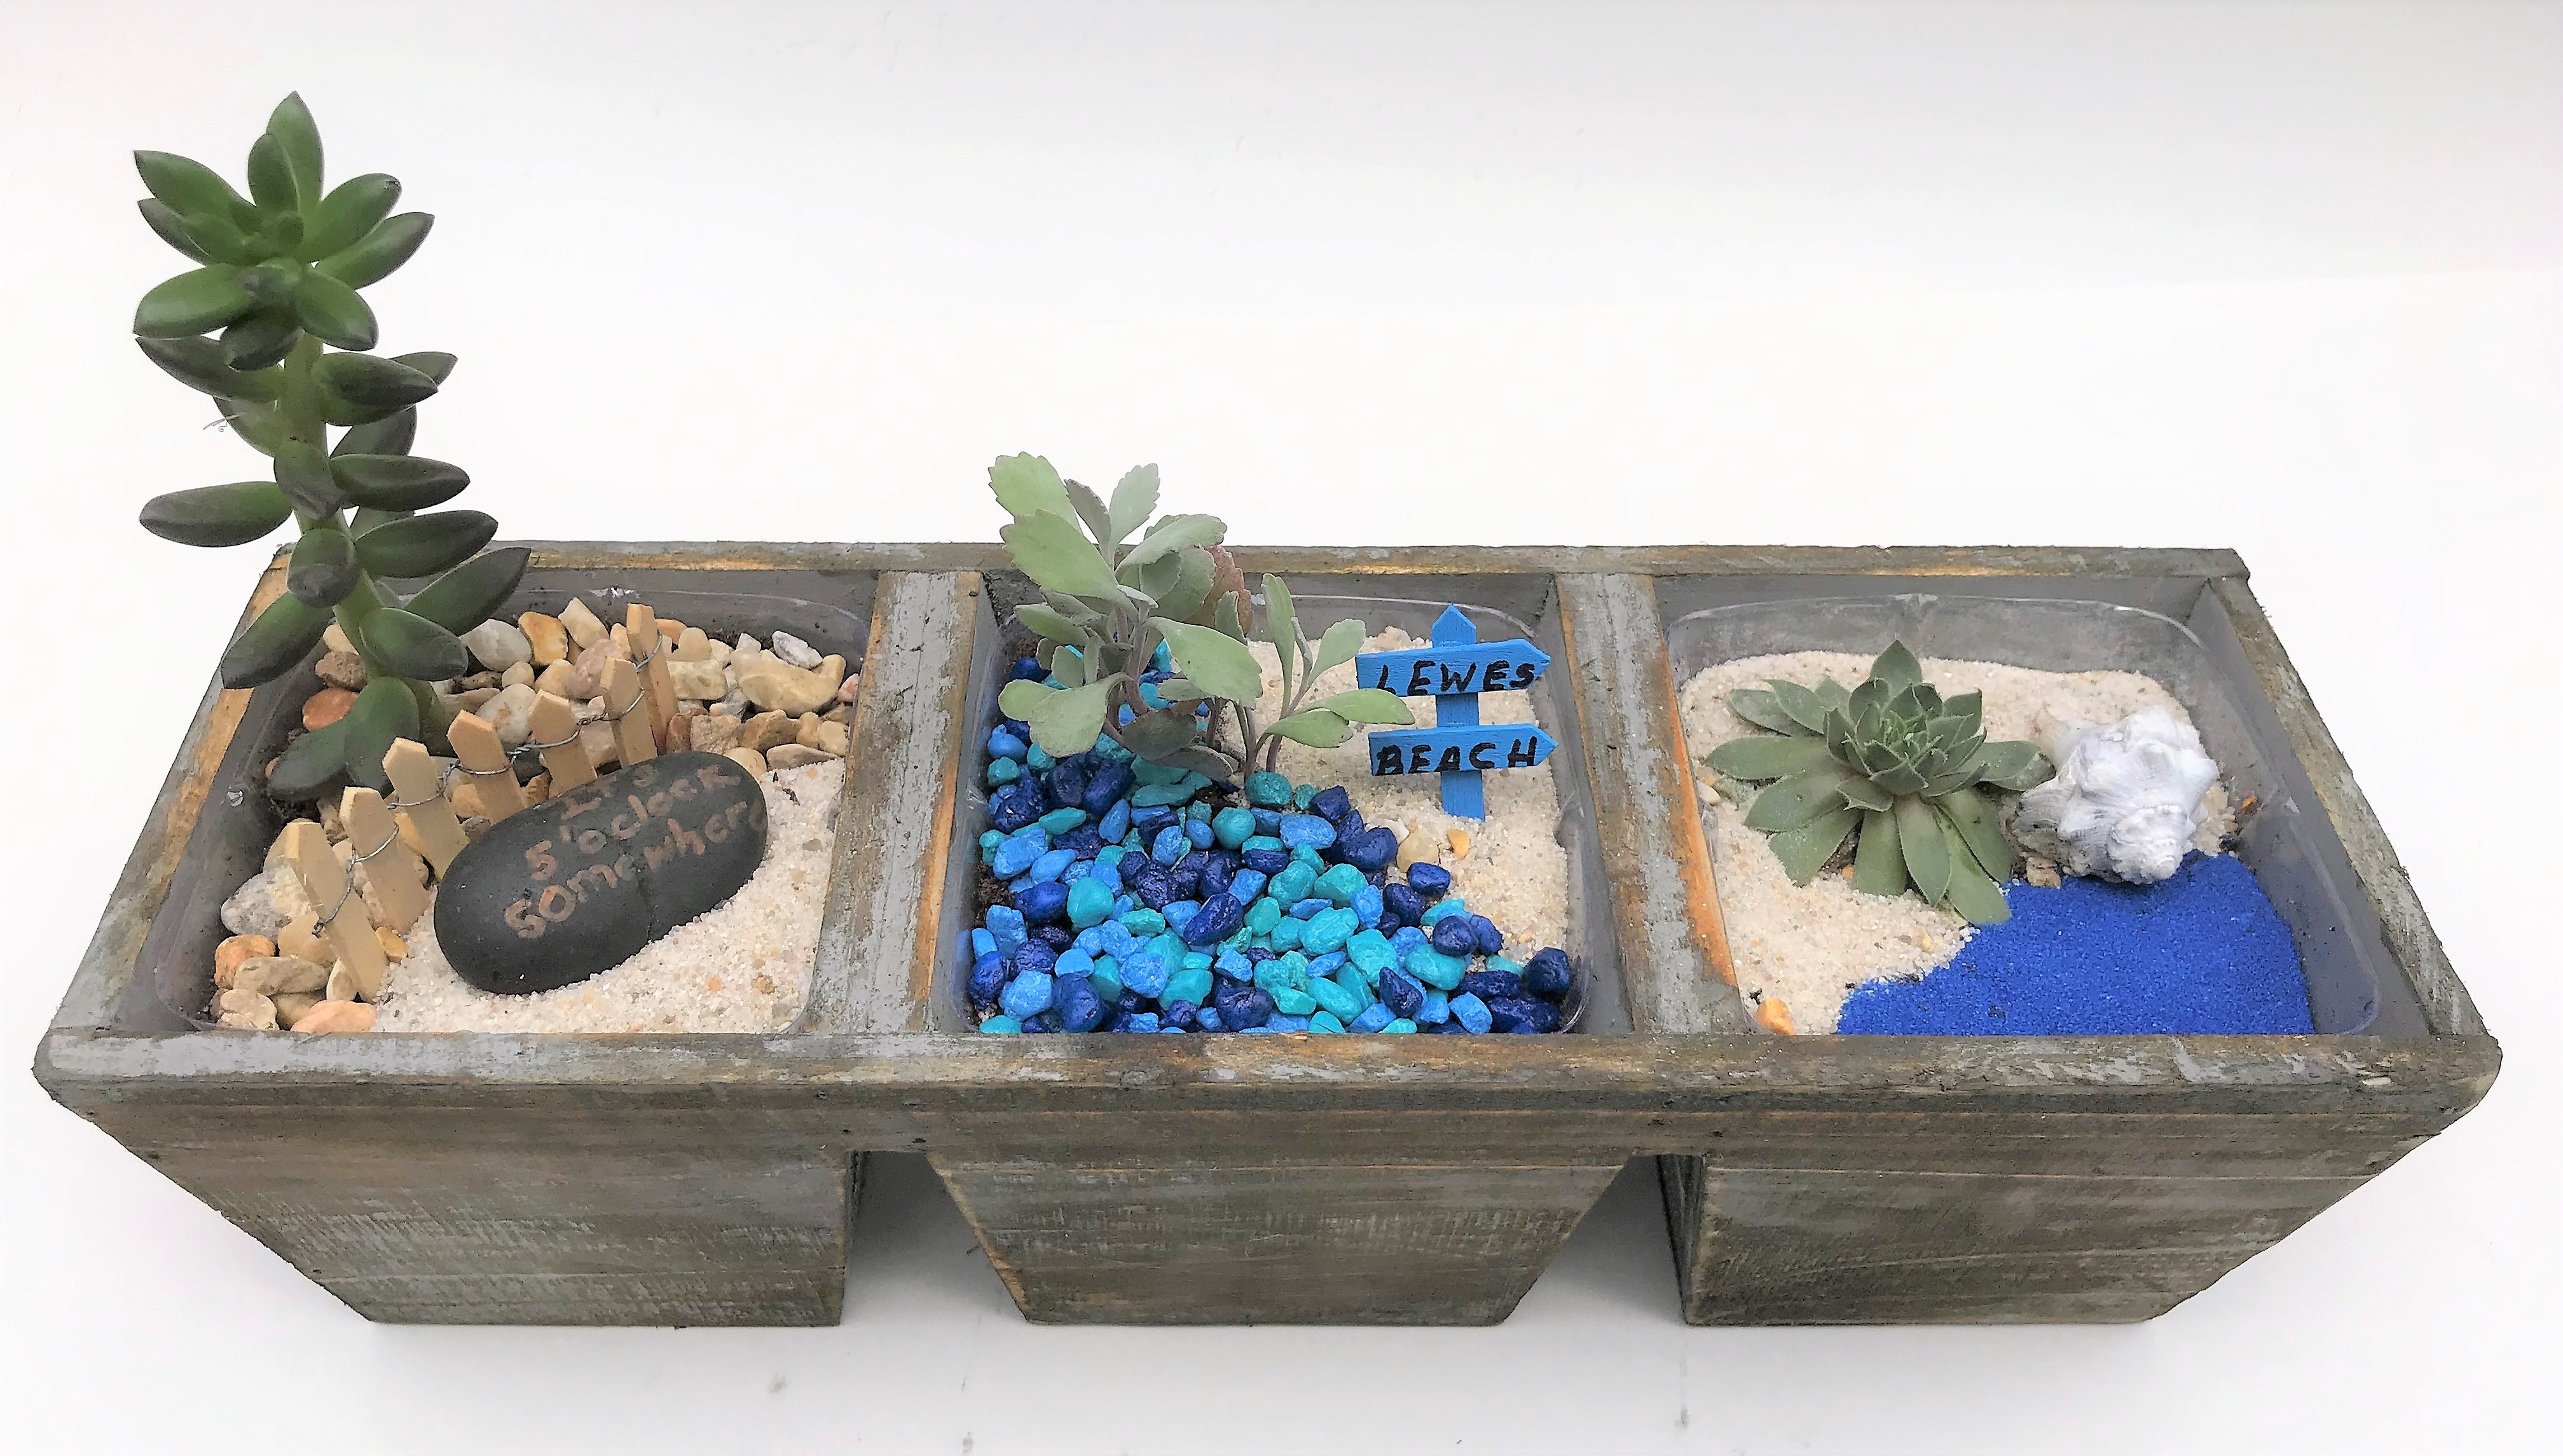 A Beach Scapes Wooden Planter in 3 Sections plant nite project by Yaymaker